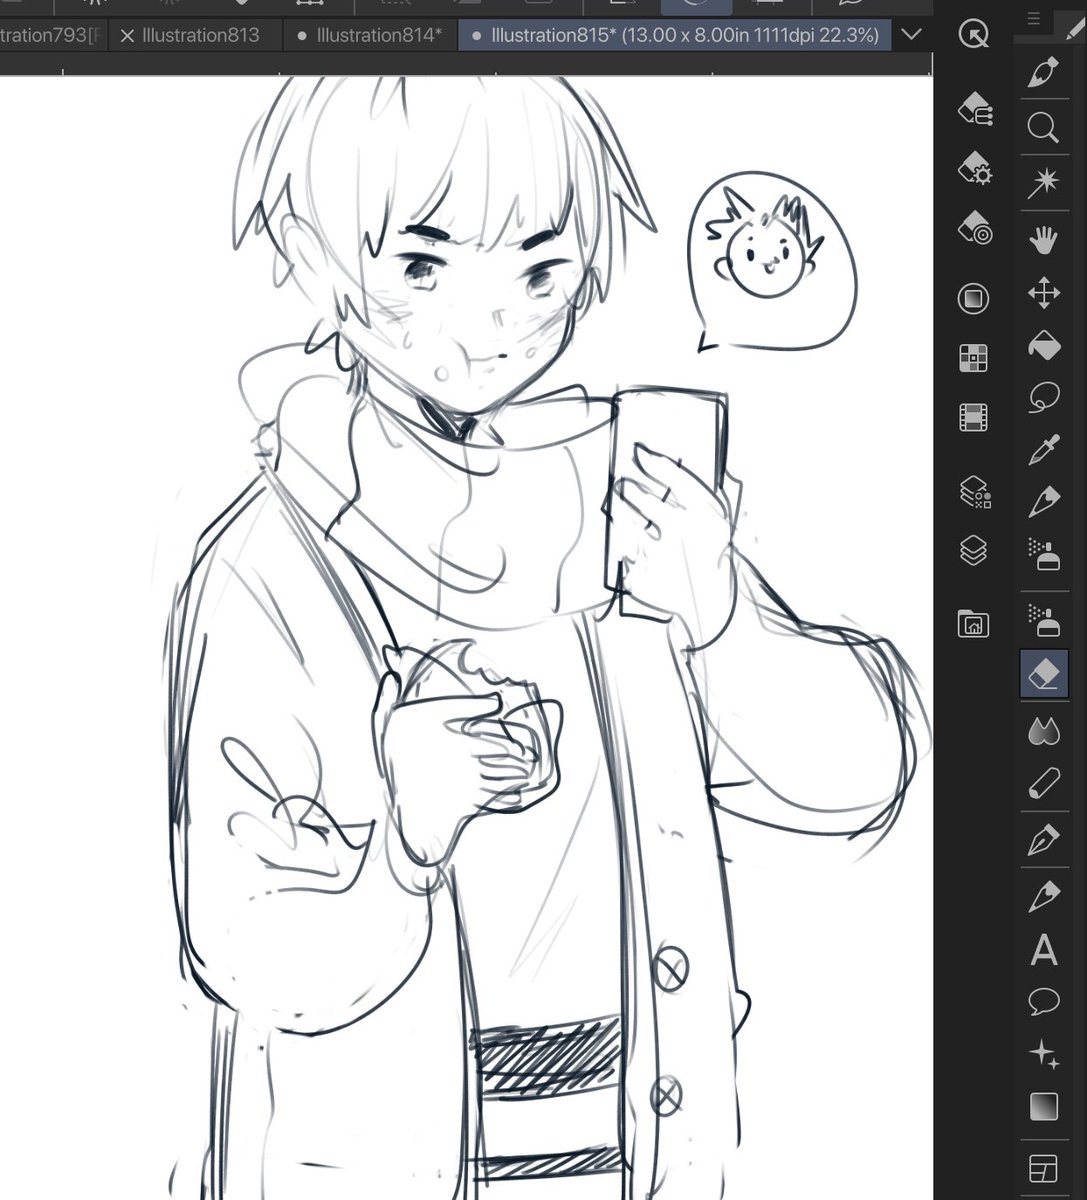 Sketched nomming goshiki in the train ride today. I'll probably finish him when I get home 